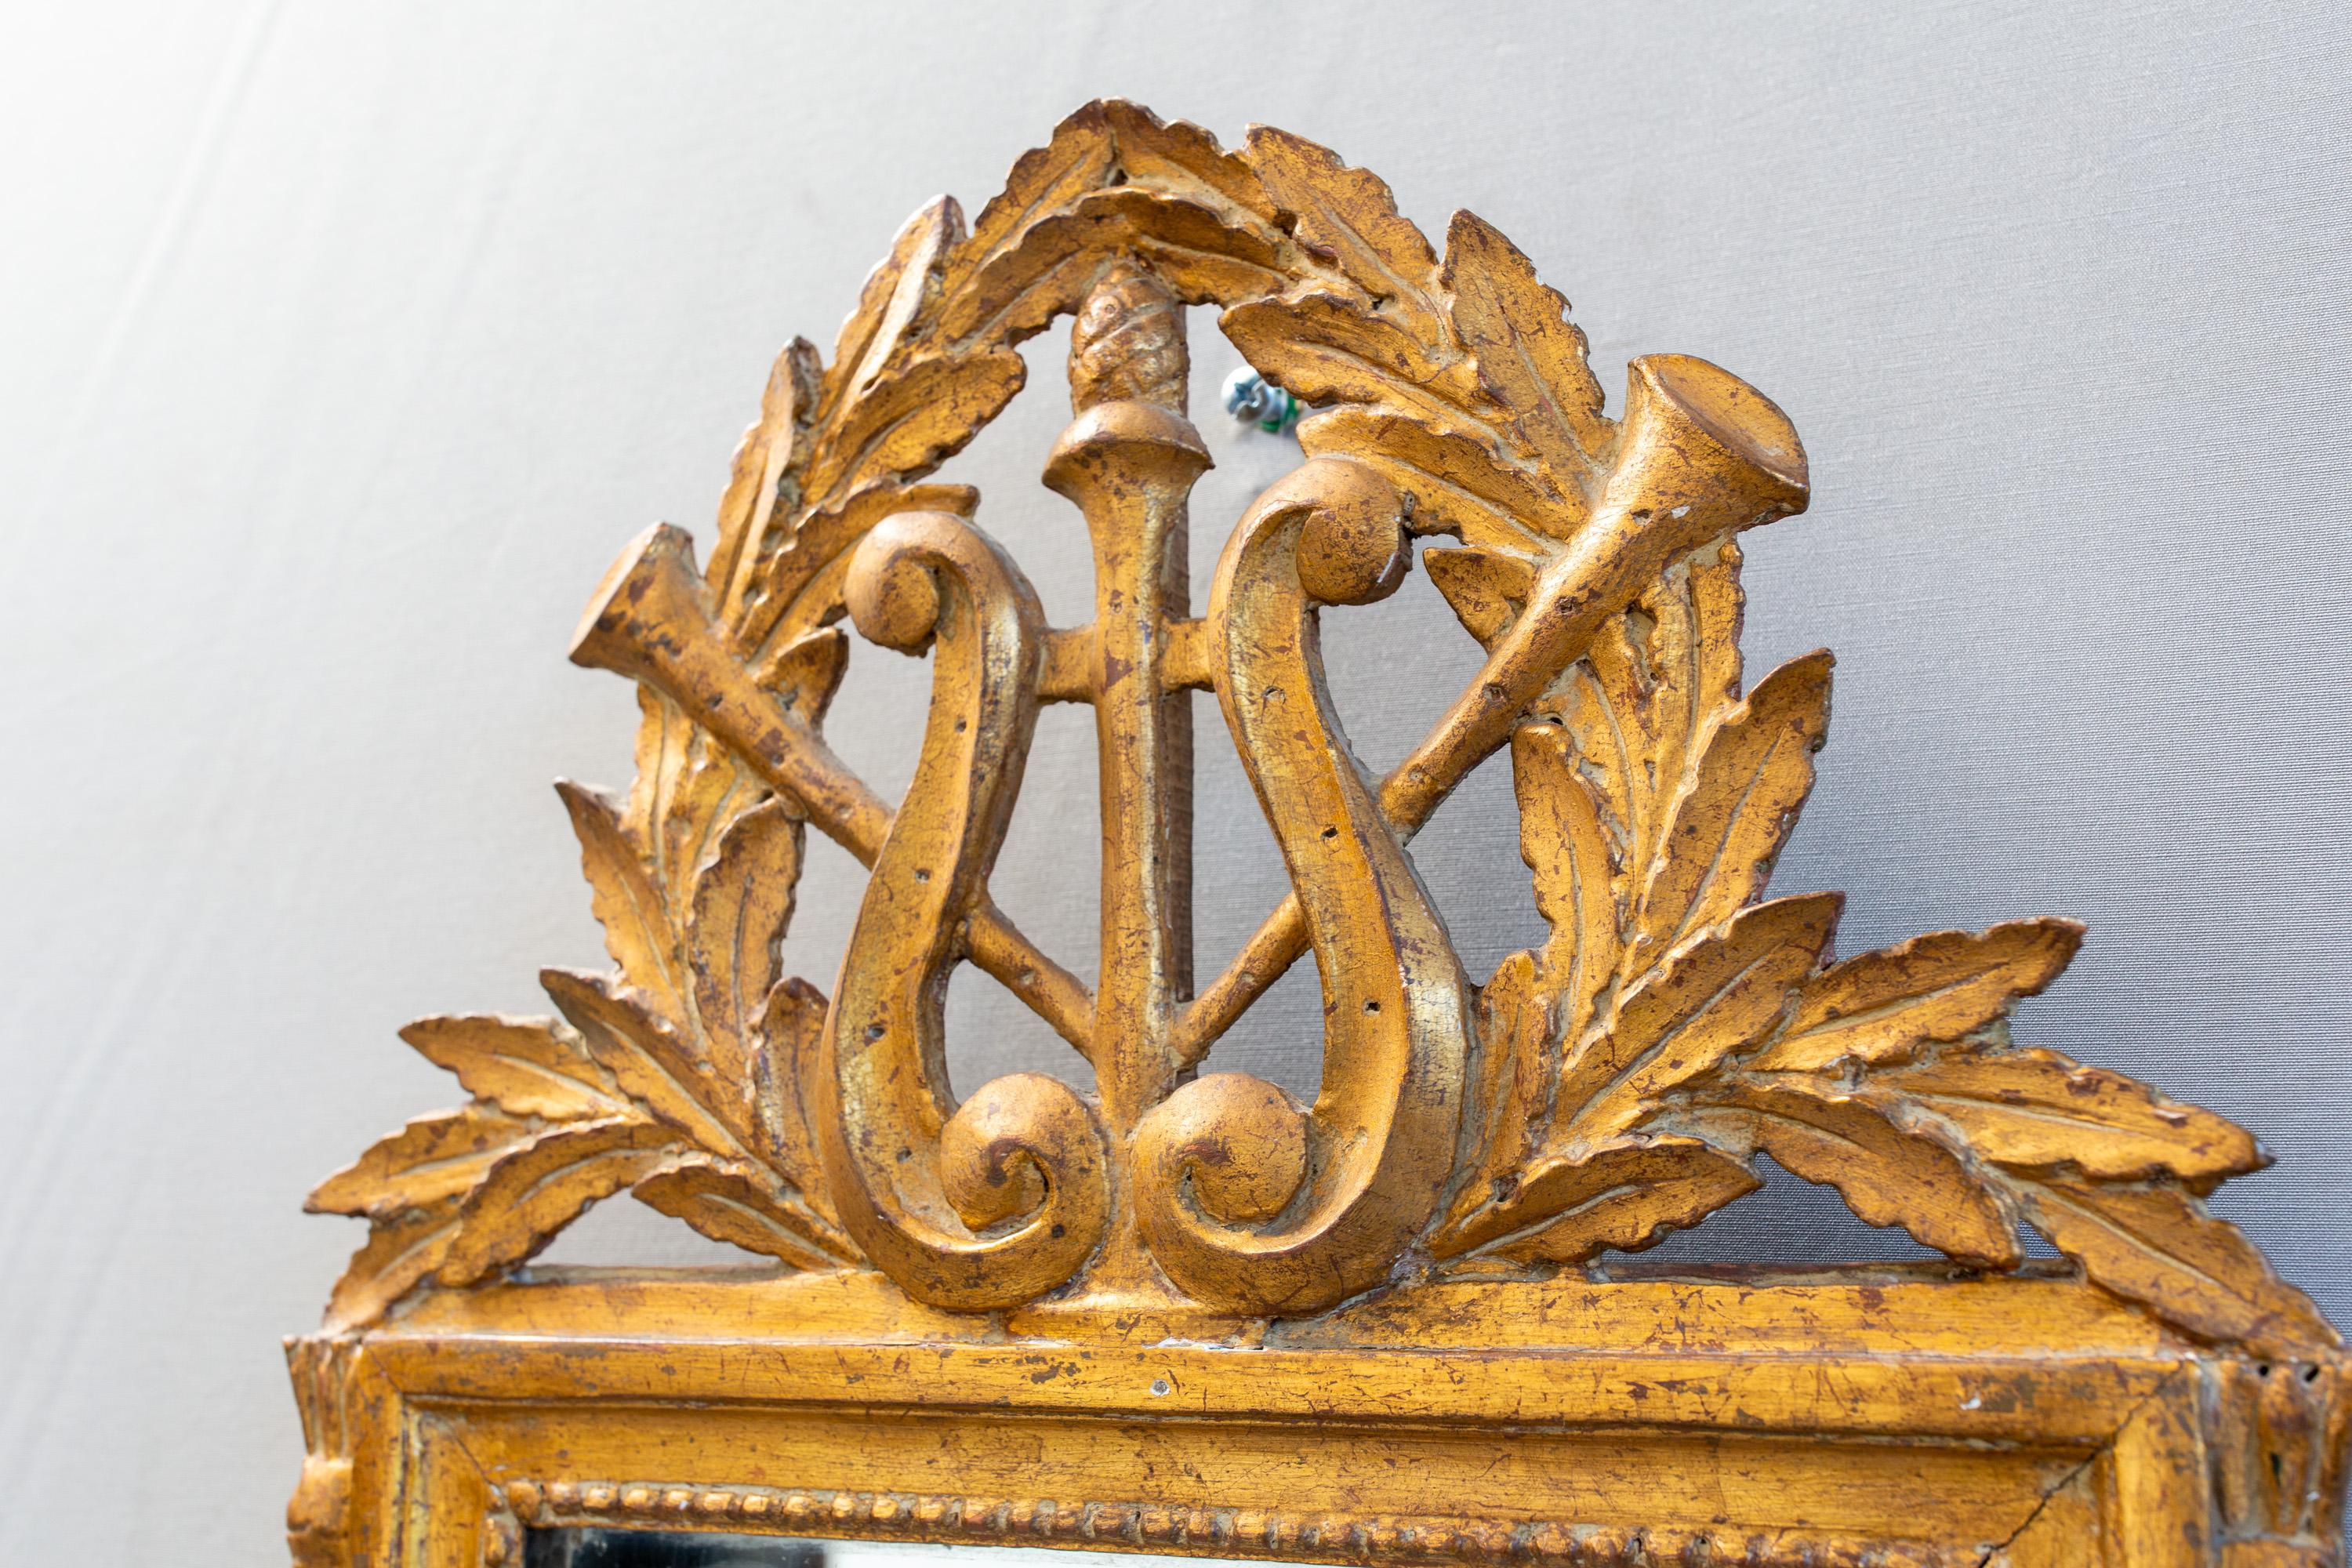 Gilded and carved late 18th century French mirror with lyre and acanthus detail. Very good condition considering age.